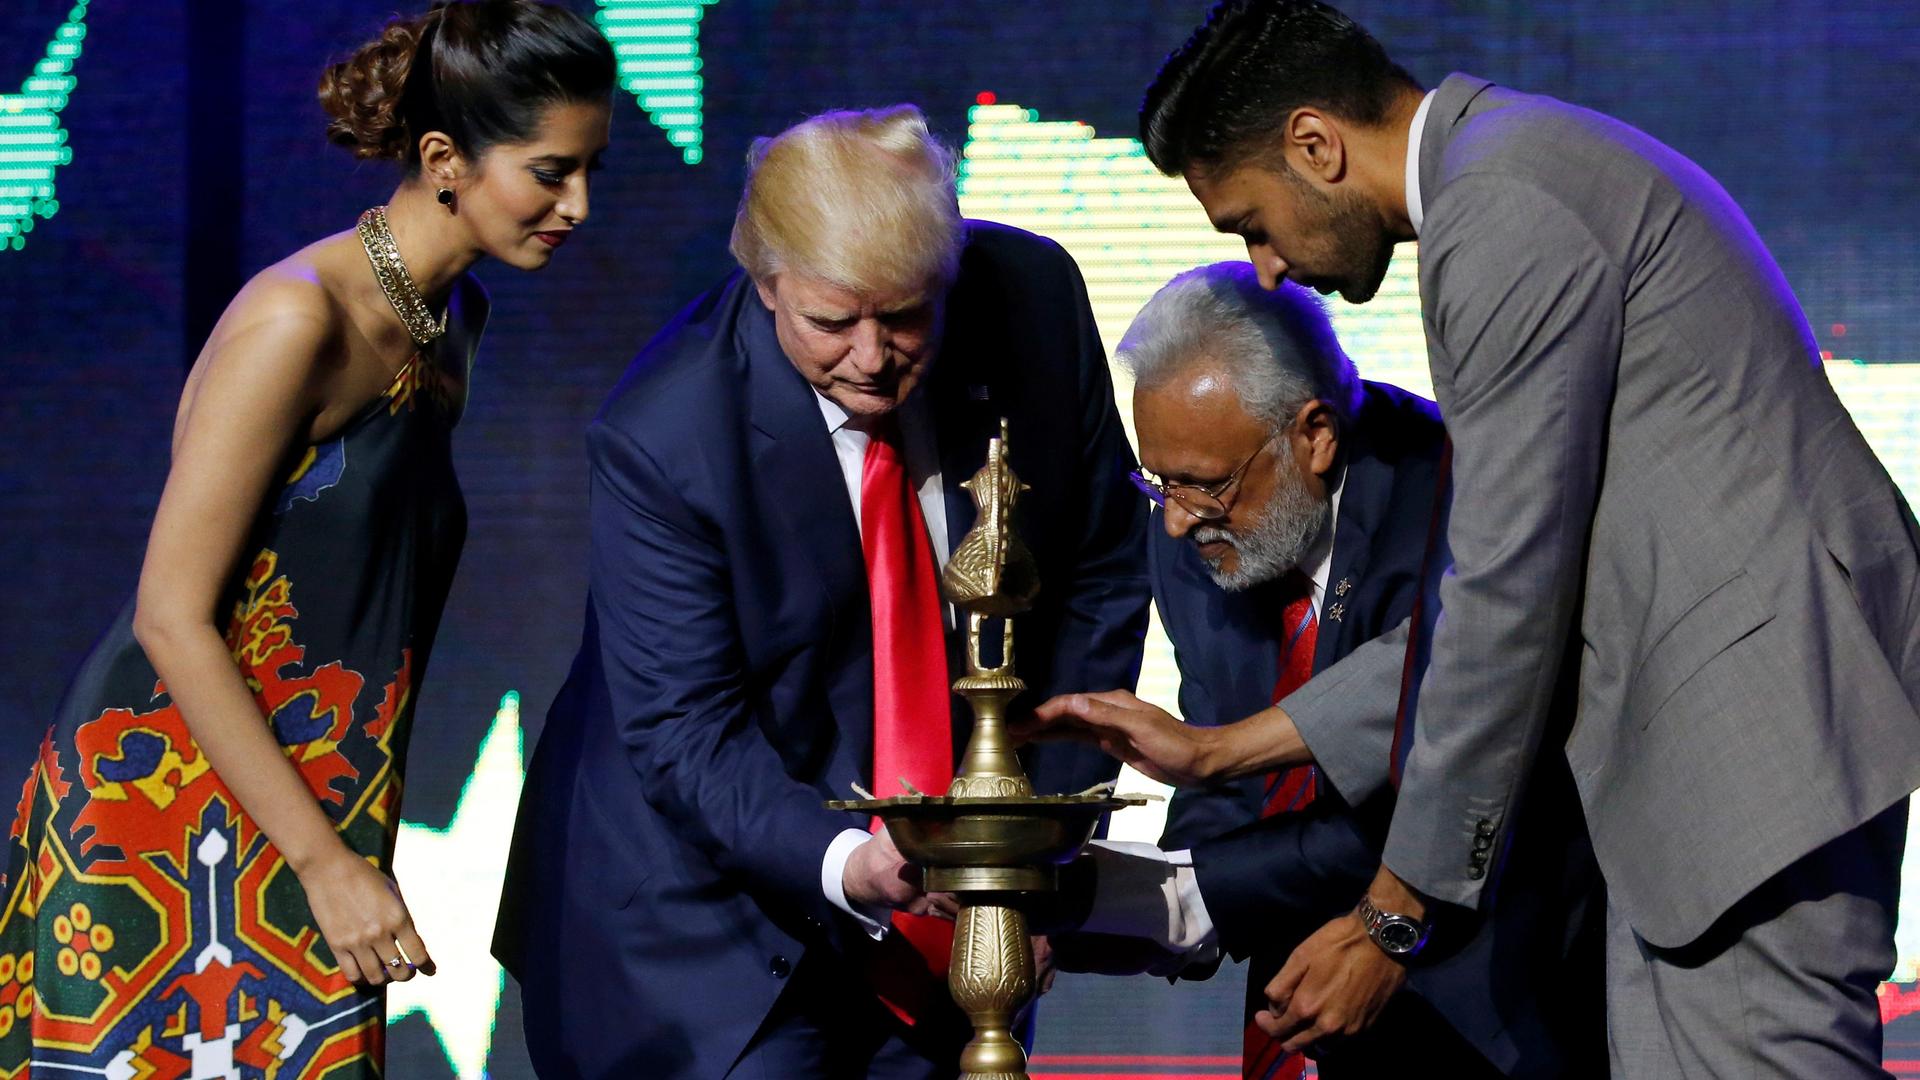 Donald Trump promised Indian Americans that the US will be "best friends" with India.